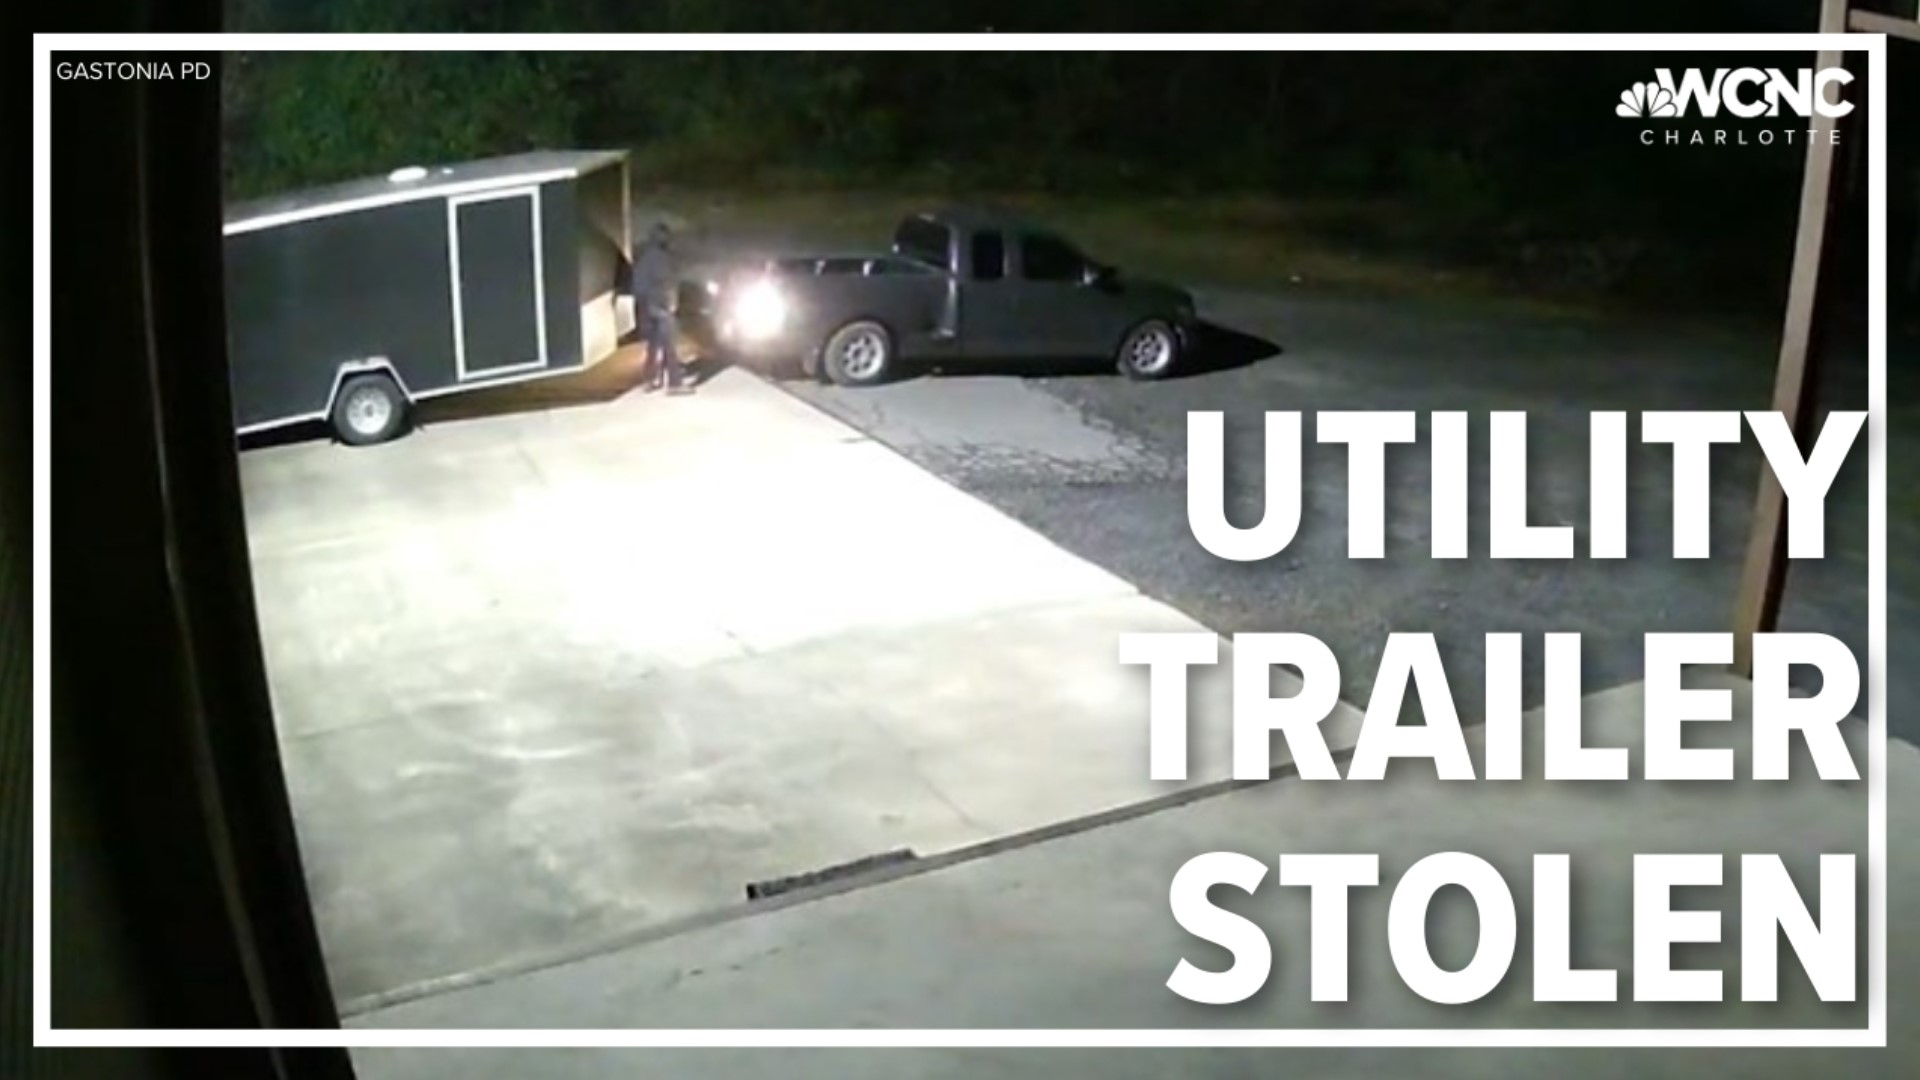 Gastonia police are asking for help after a utility trailer was stolen from a local business.